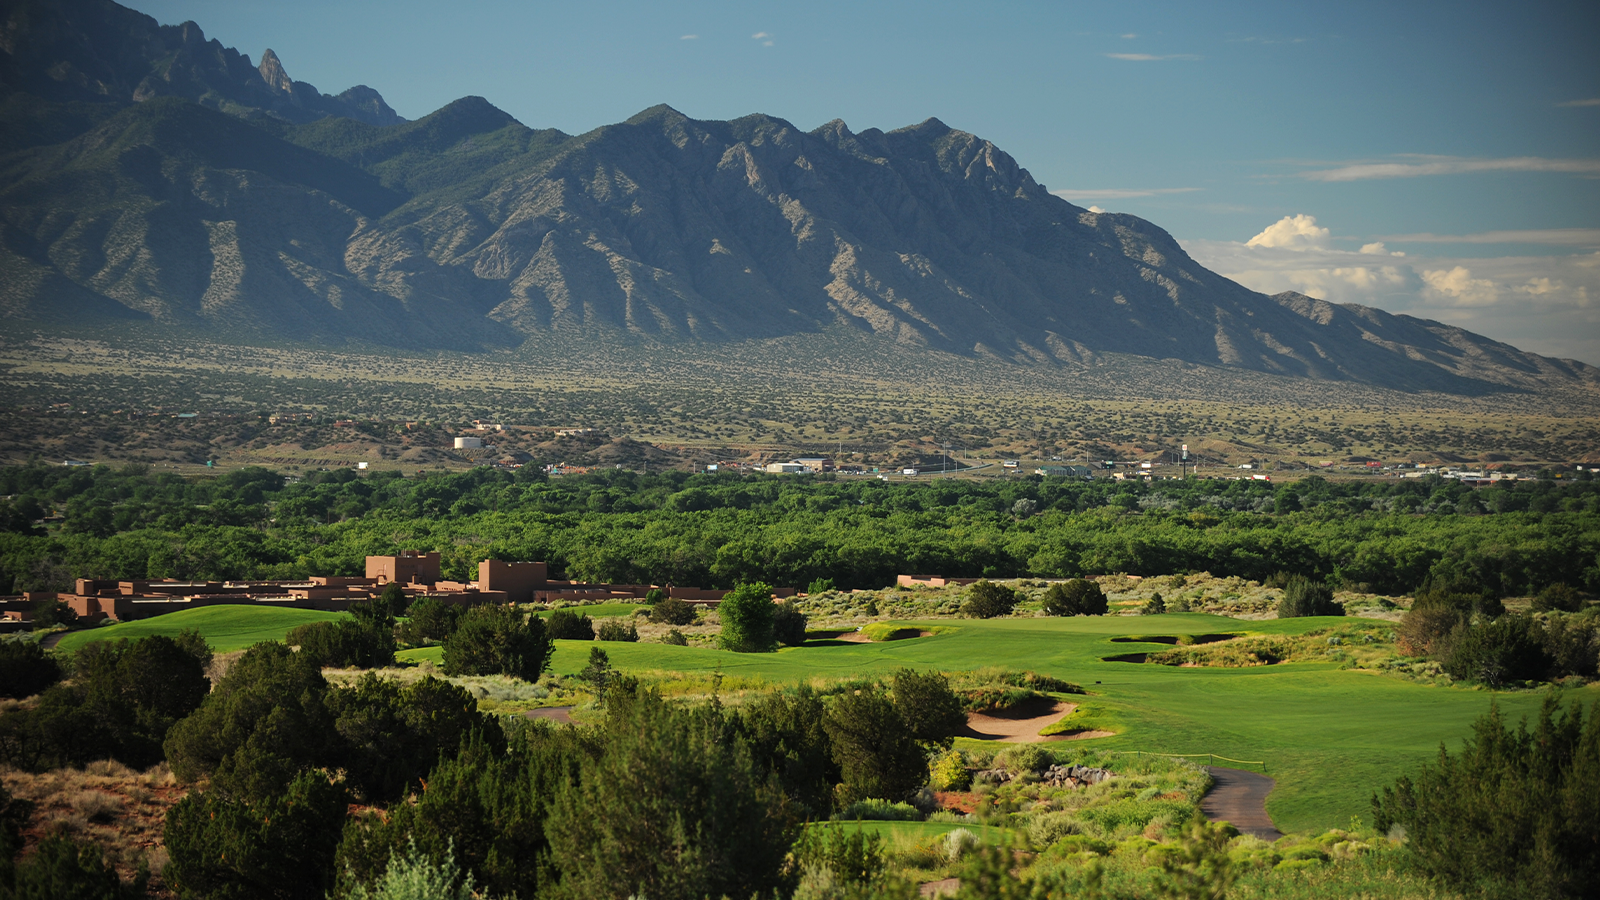 A course scenic of hole 8 at Twin Warriors Golf Club in Santa Ana Pueblo, New Mexico, USA, on Tuesday, July 22, 2008. The site of the 42nd PGA Professional National Championship. (Photo by Montana Pritchard/The PGA of America)